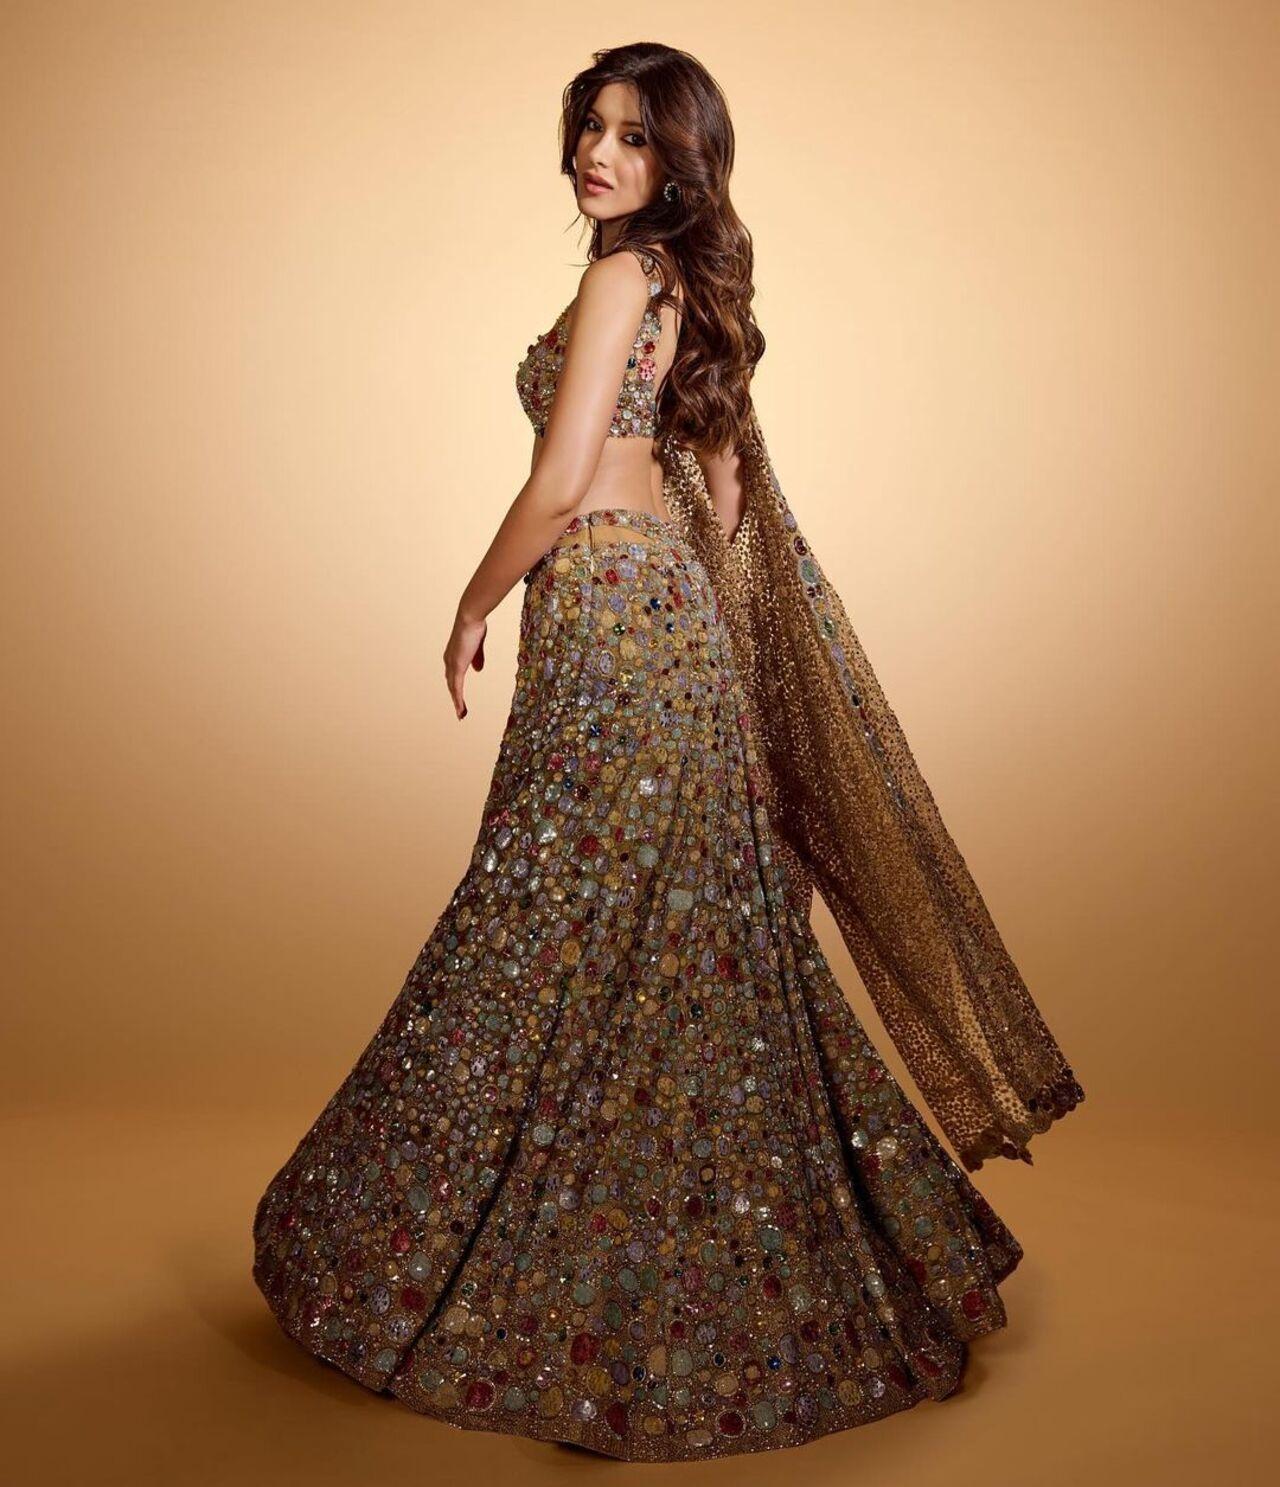 Shanaya Kapoor looked stunning in a golden embellished lehenga for a Diwali party. The upcoming actress upped the glam level